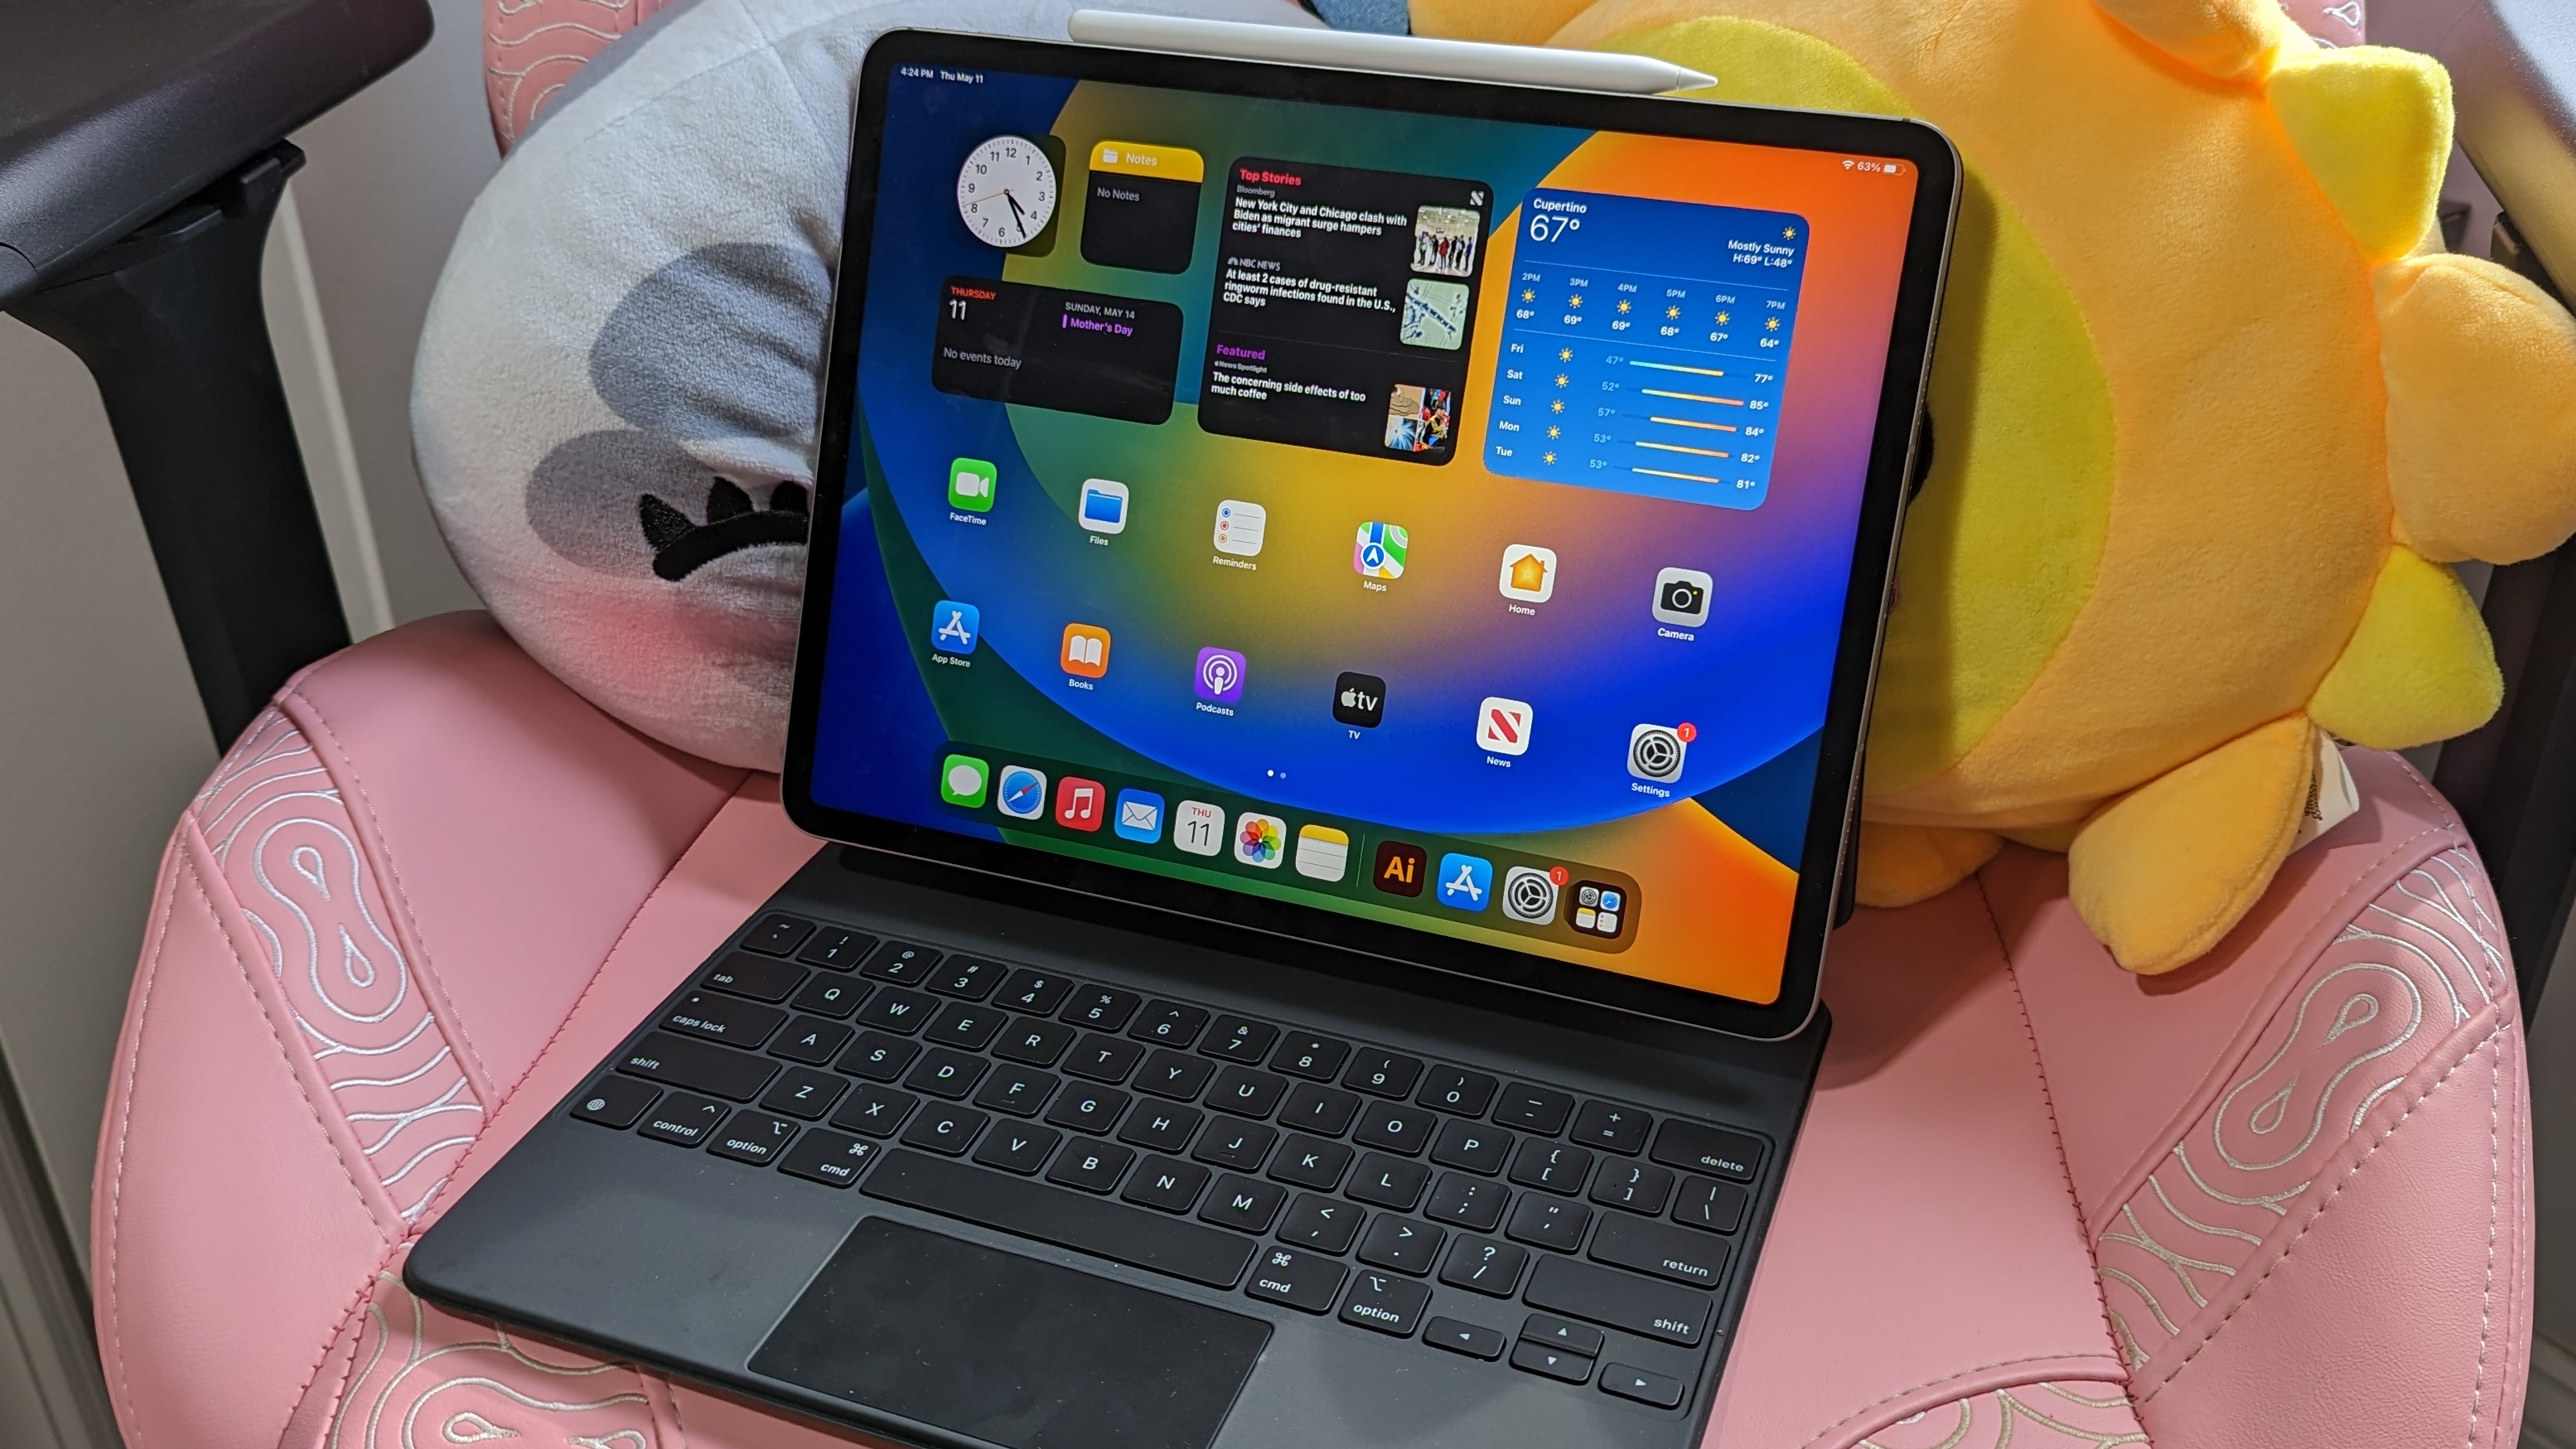 iPad Pro 11-inch review: This iPad feels more like a personal